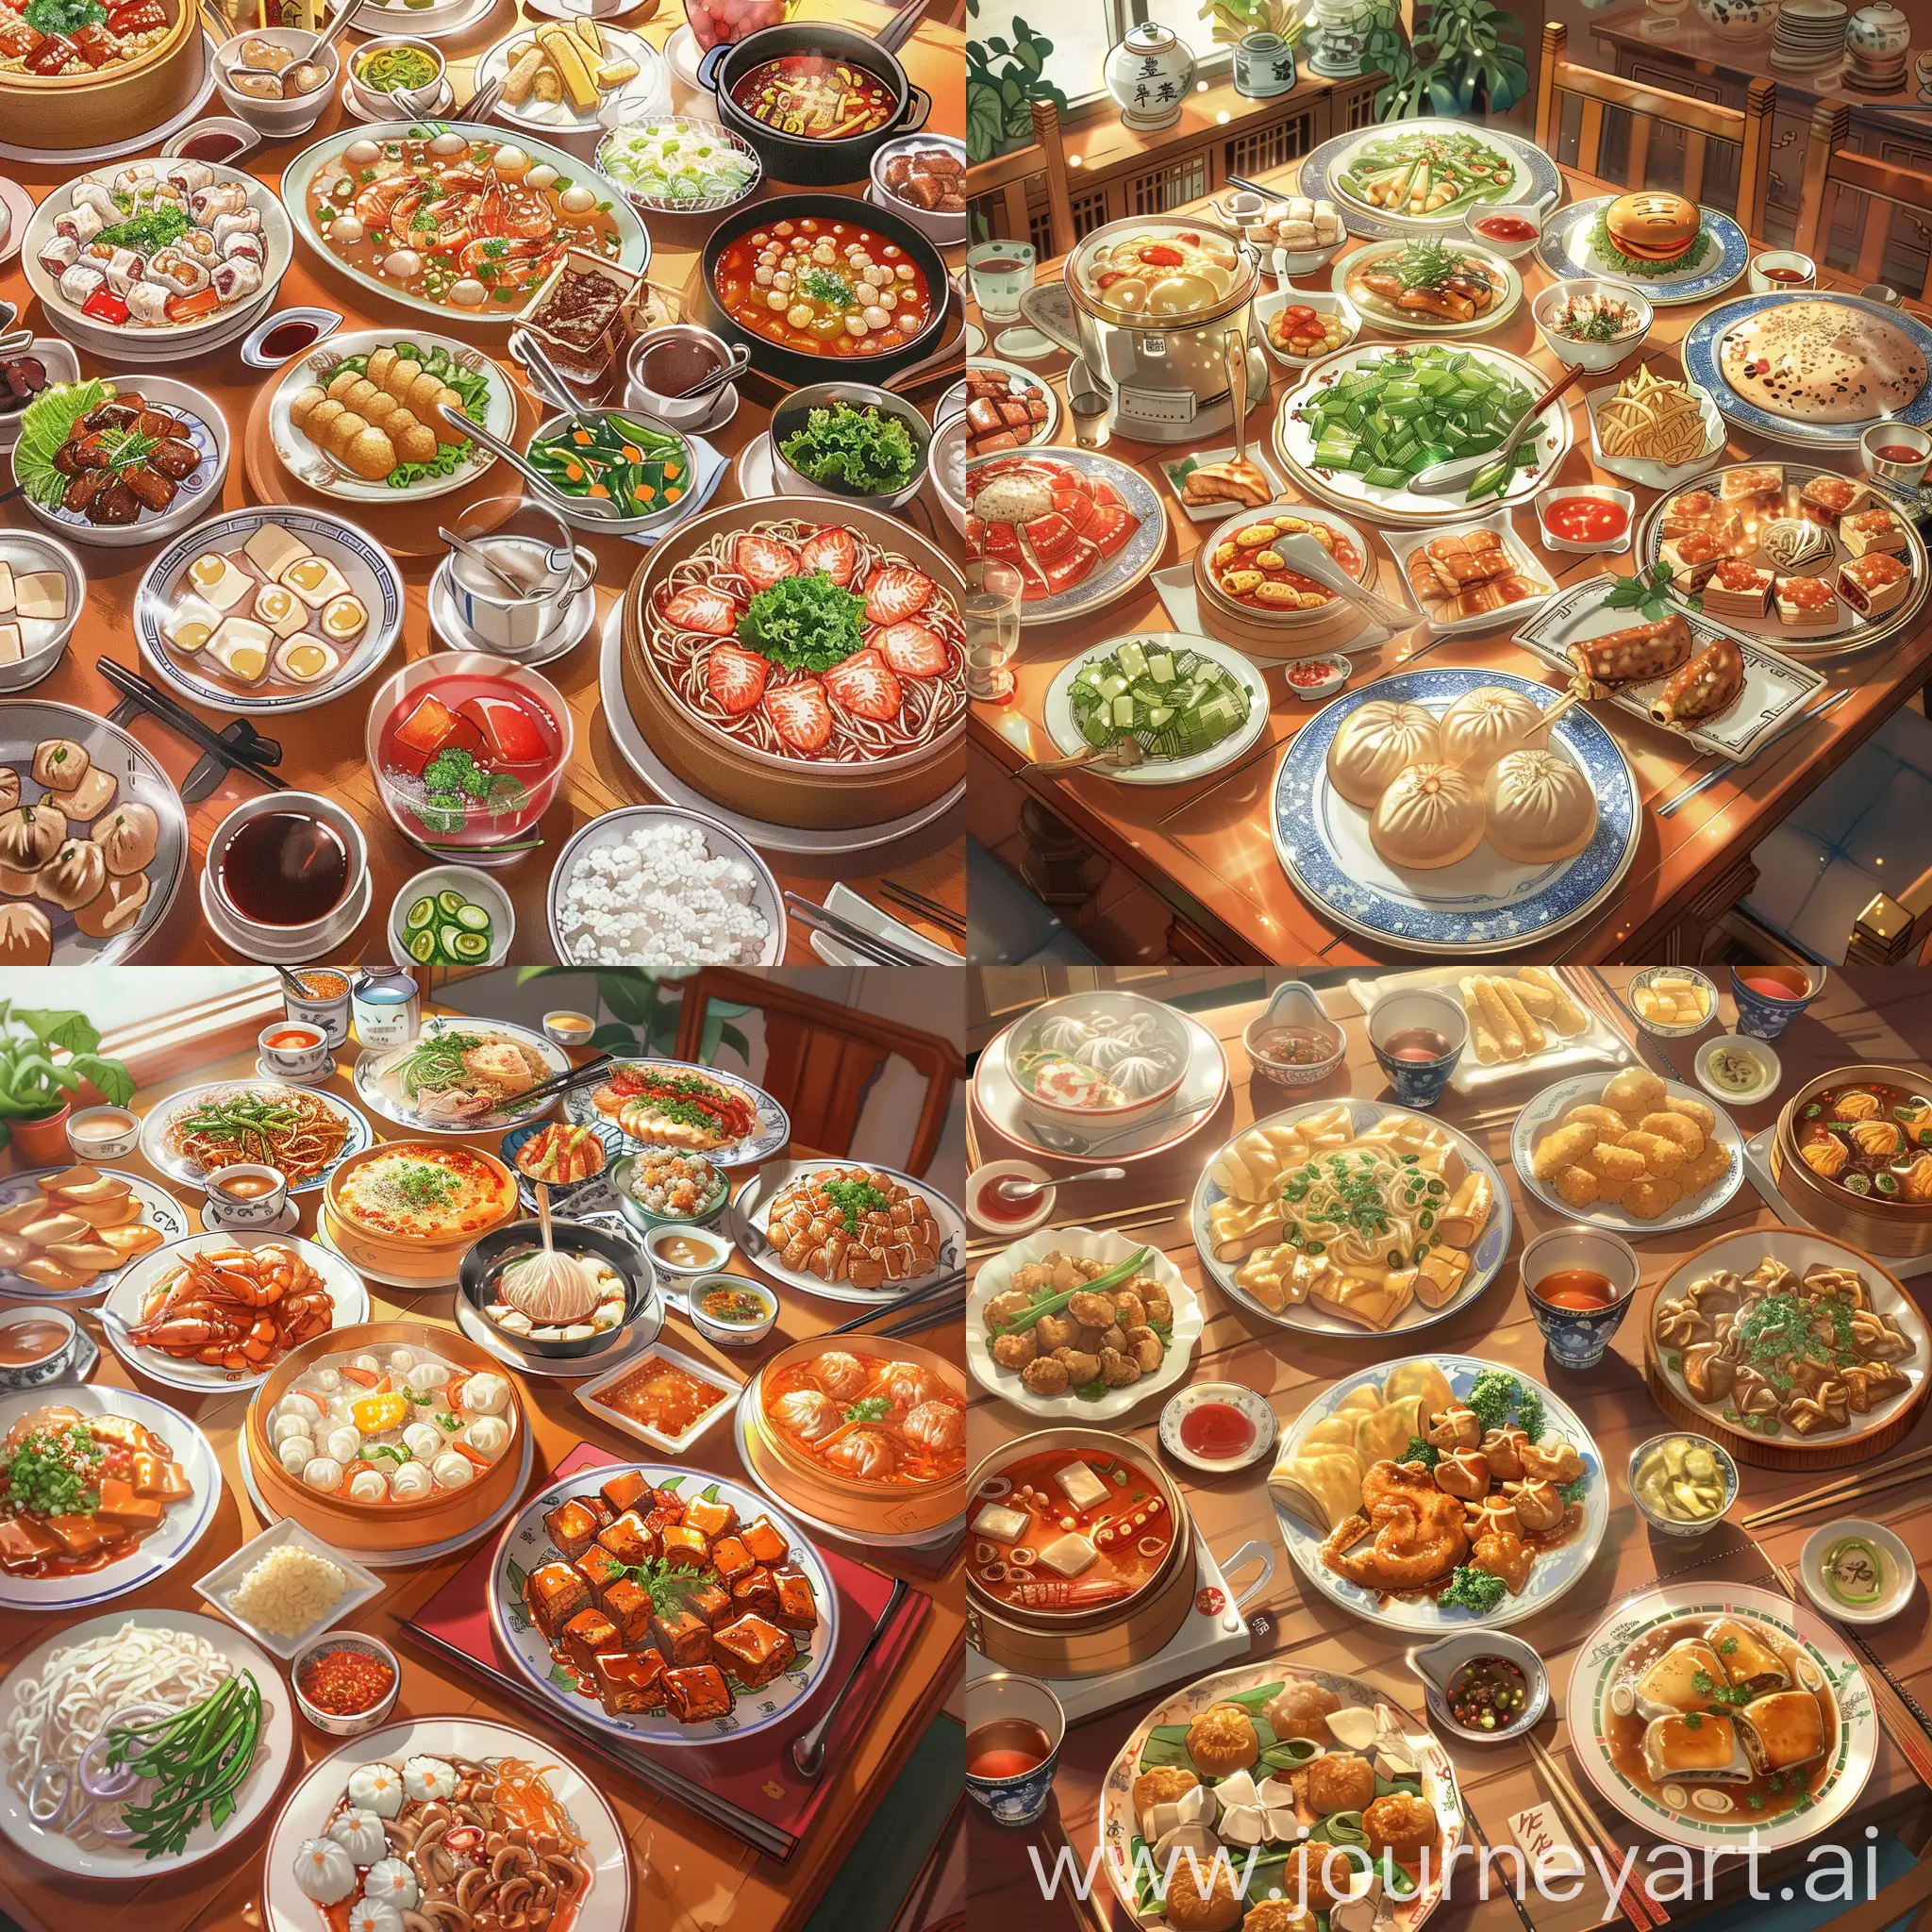 Table-Full-of-Chinese-Cuisine-in-Anime-Style